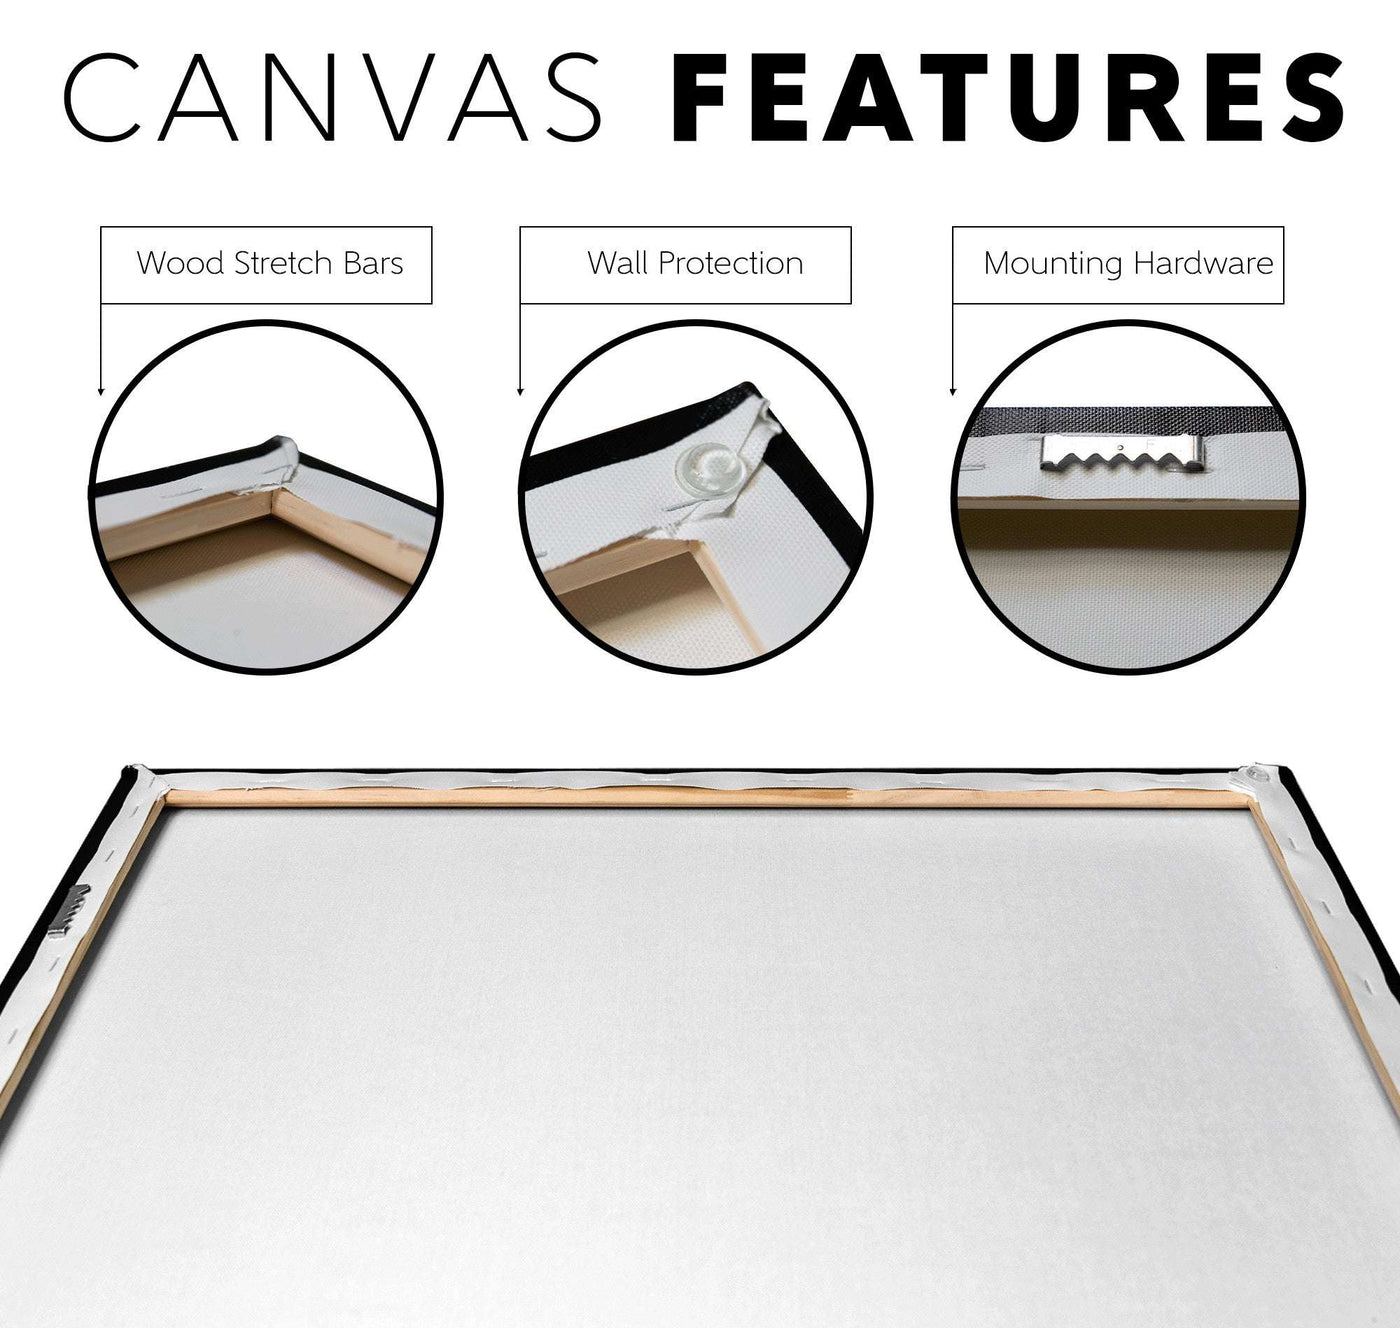 Illustration showing features of a Canvas Skunk Print: wood stretch bars, wall protection, and mounting hardware, with labeled close-up images and a central view of the canvas back.